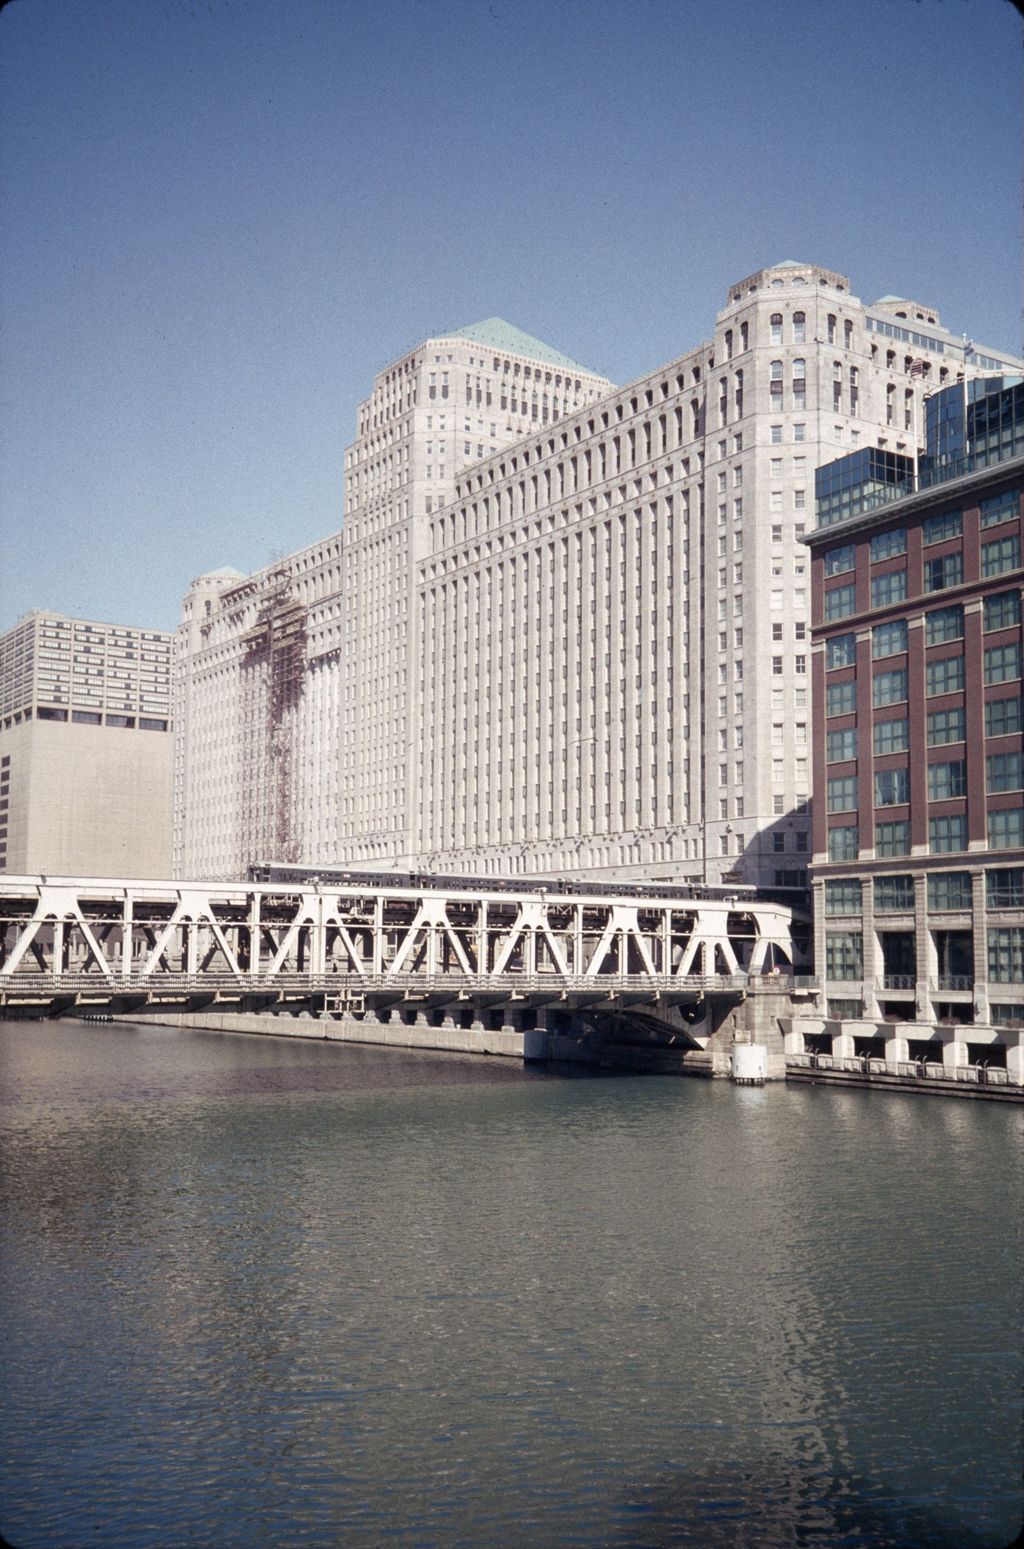 Miniature of Merchandise Mart and Chicago River